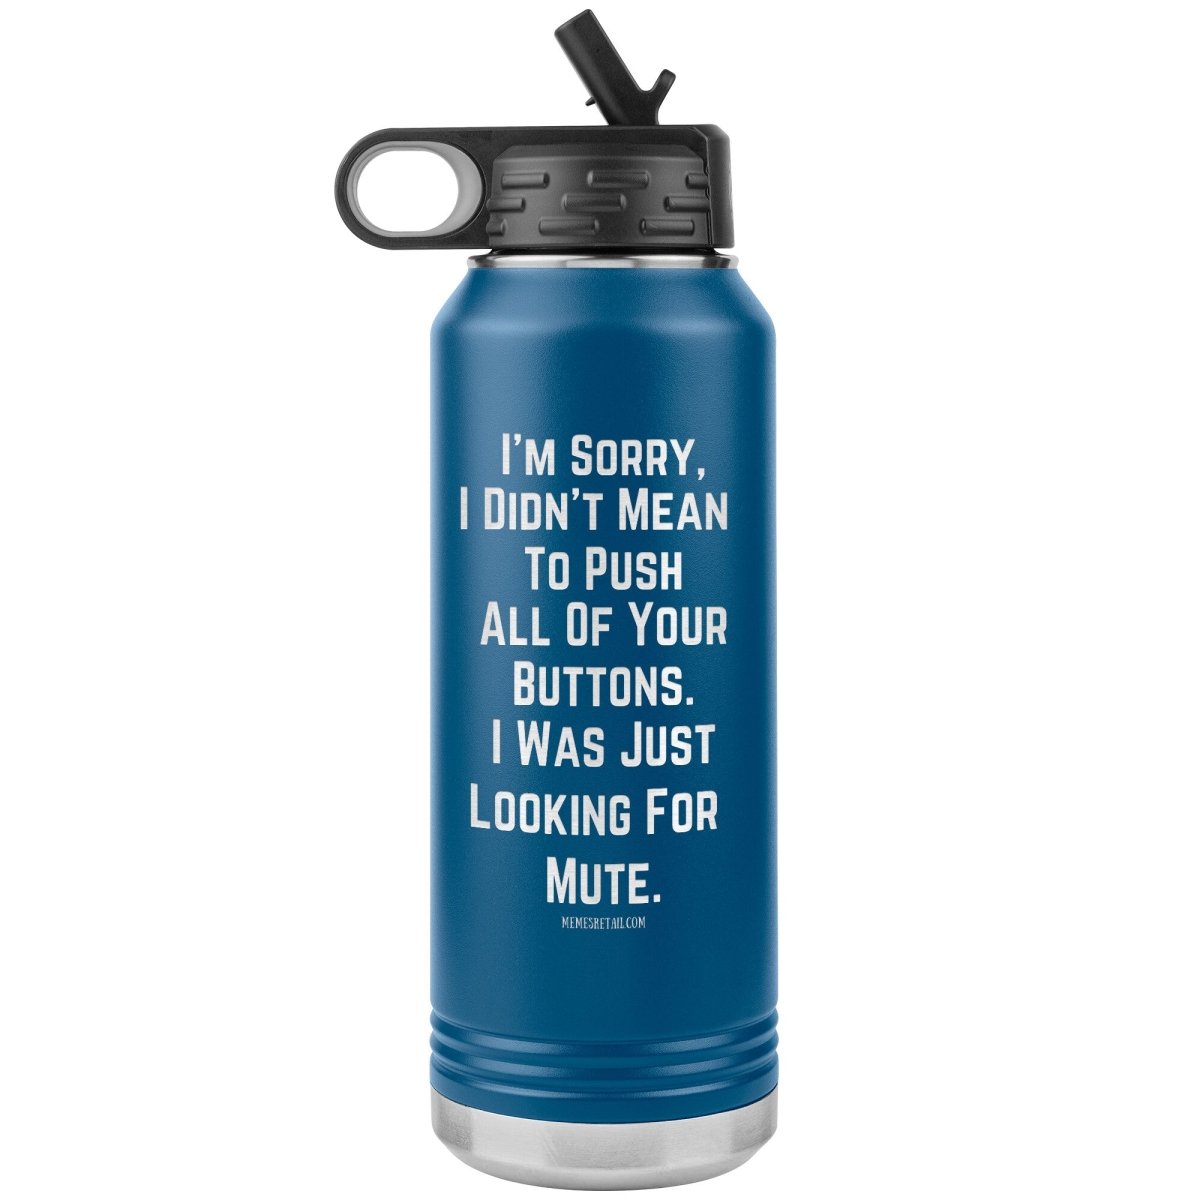 I’m sorry, I didn’t mean to push all your buttons, I was just looking for mute 32 oz water tumbler, Blue - MemesRetail.com